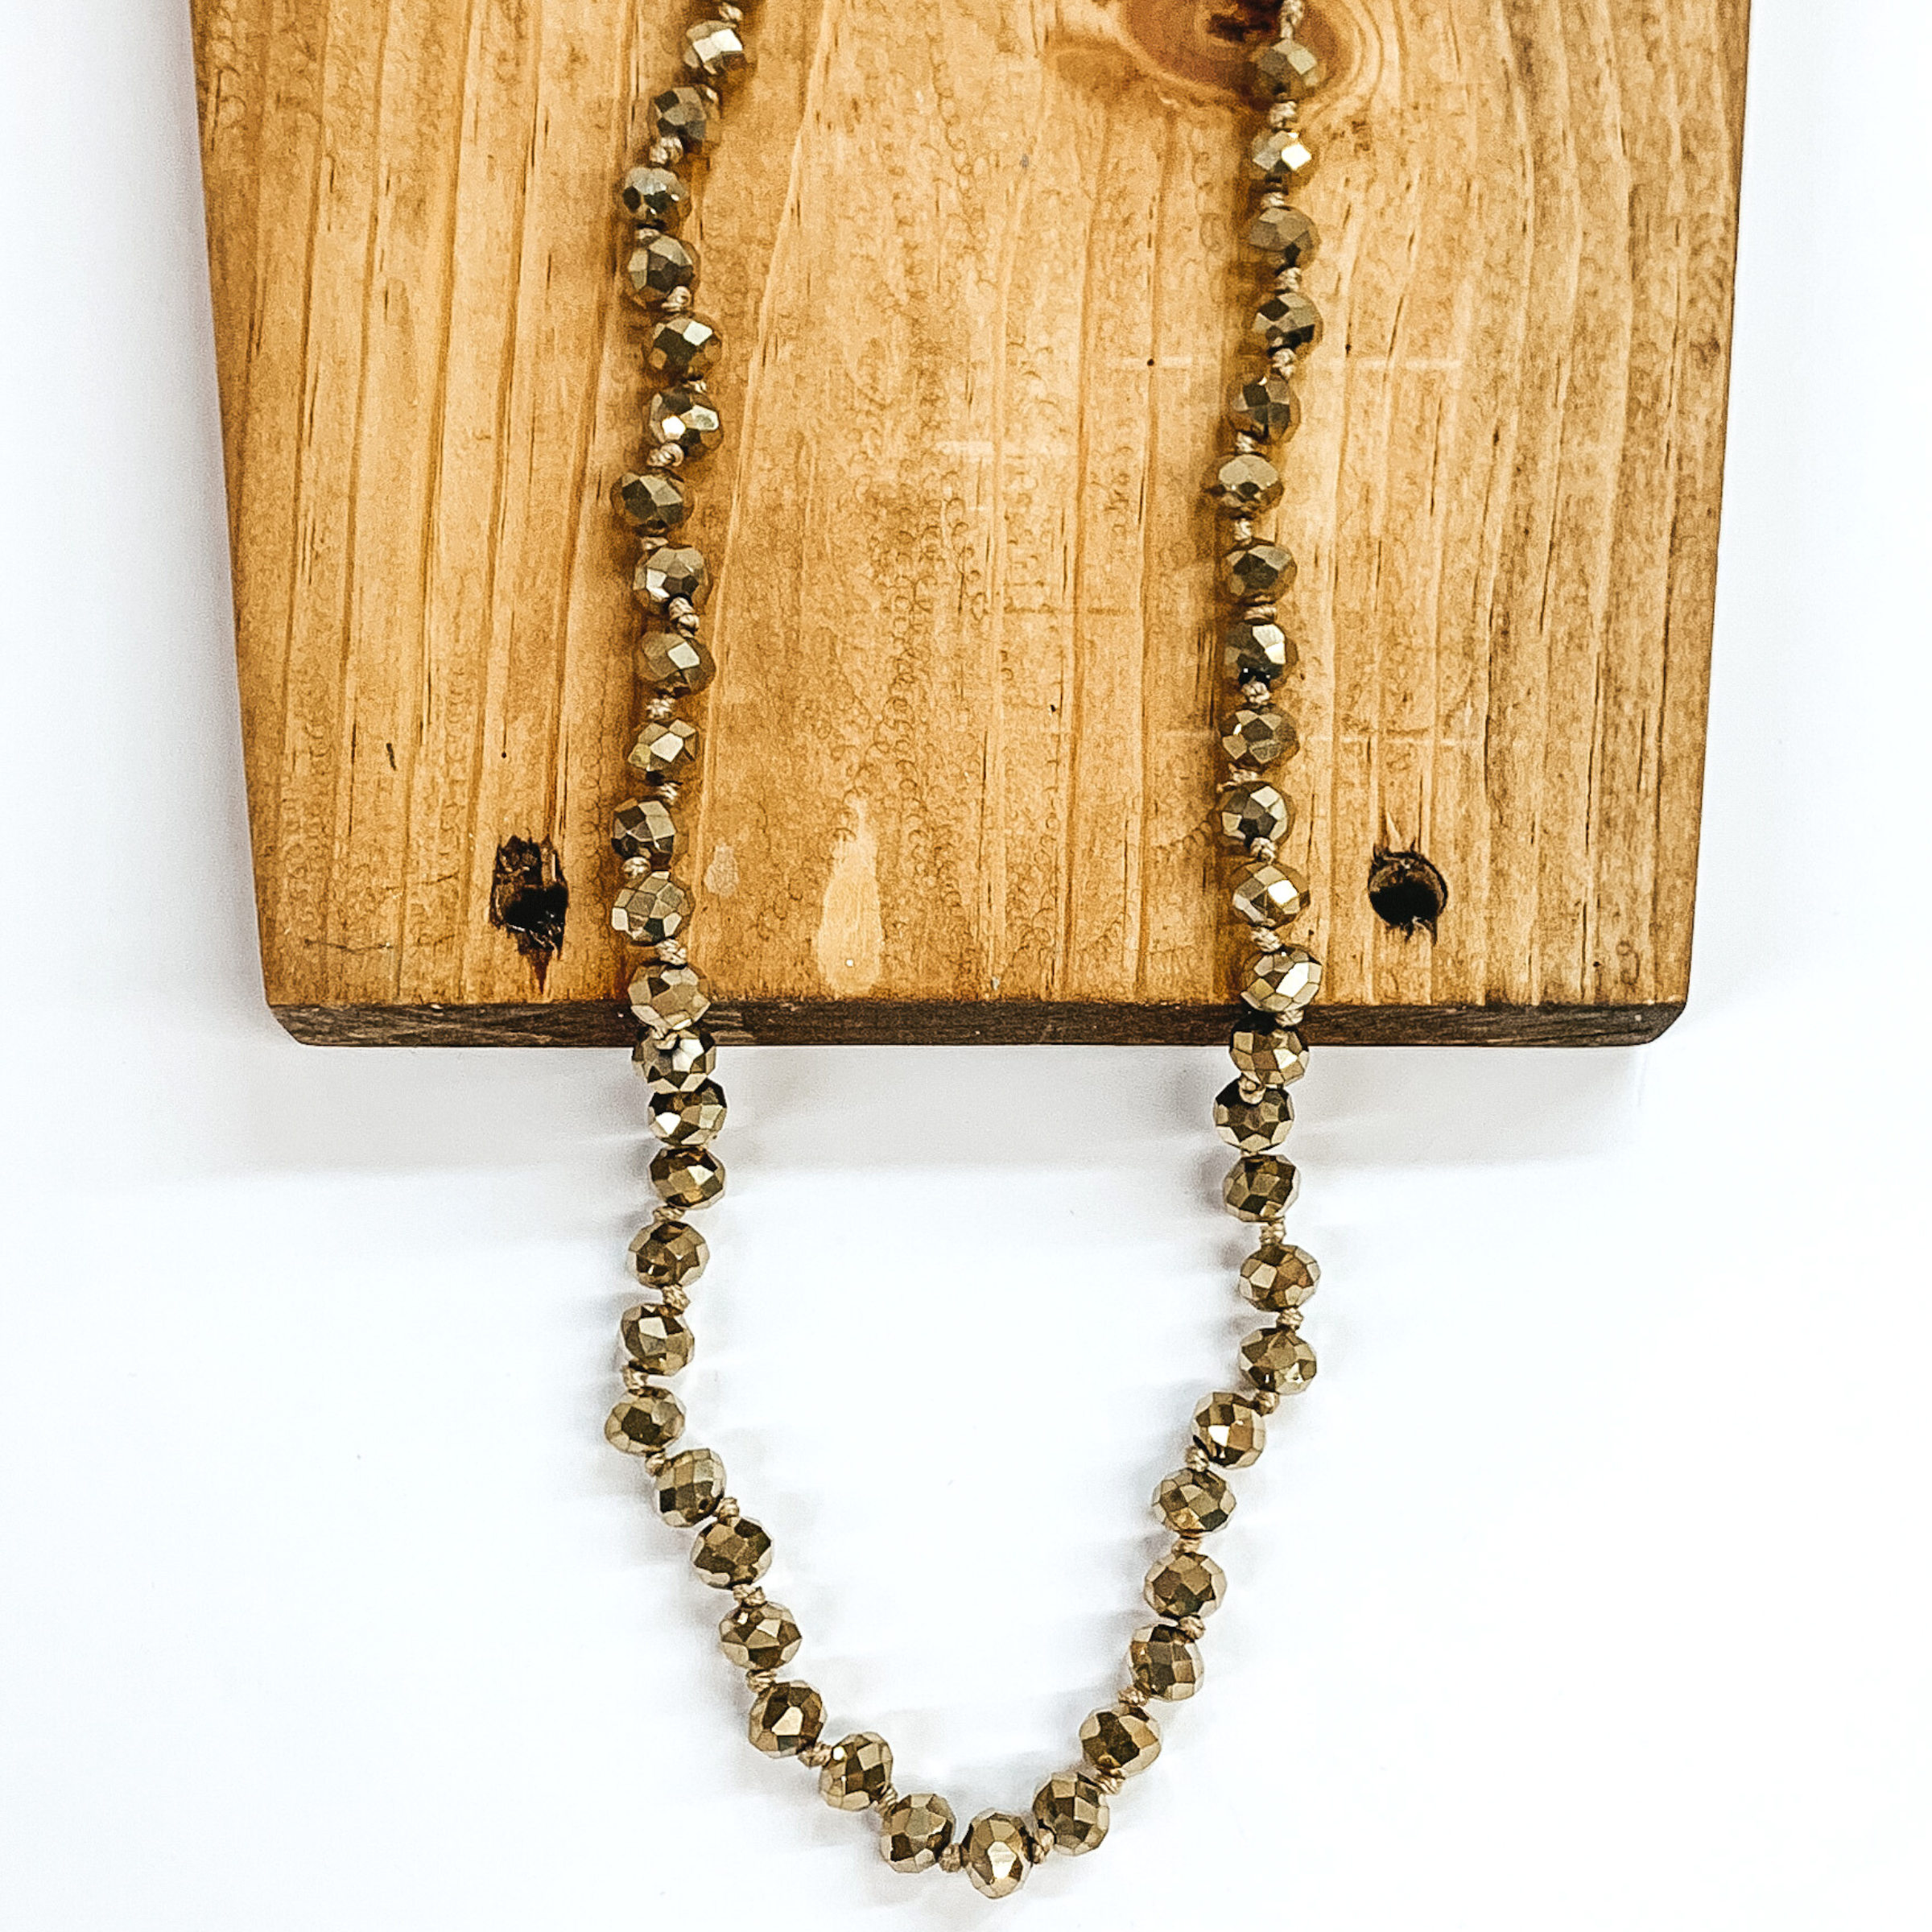 Yellowish gold crystal beaded necklace. This necklace is pictured partially laying on a brown block on a white background. 